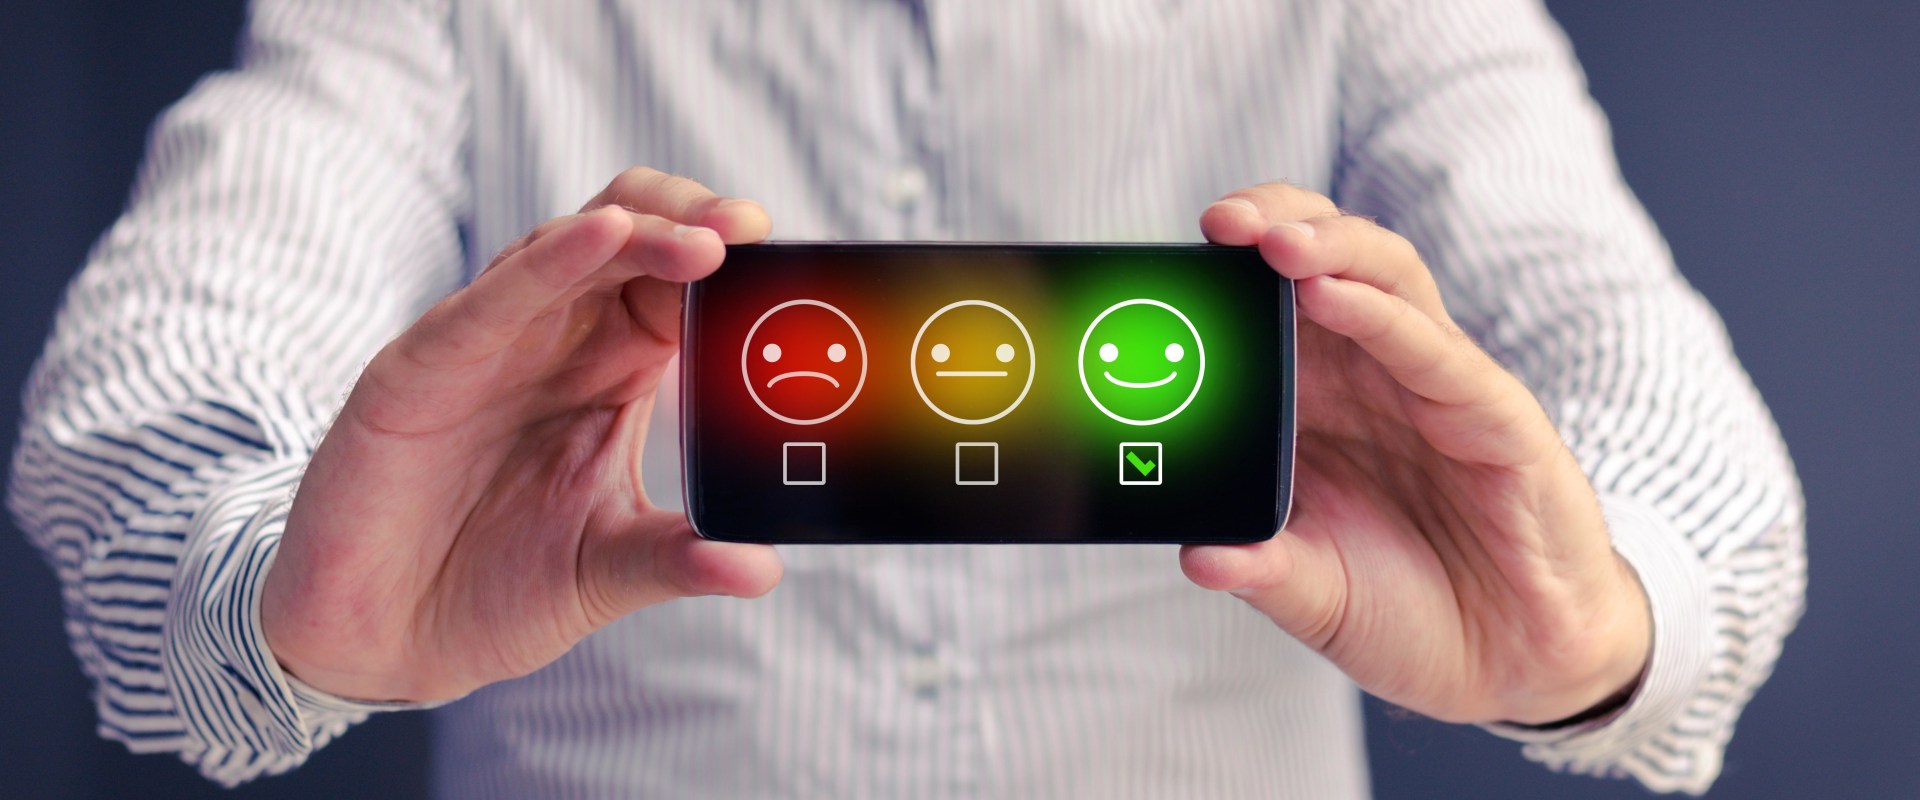 How to Write a Negative Mobile App Review Without Making Mistakes